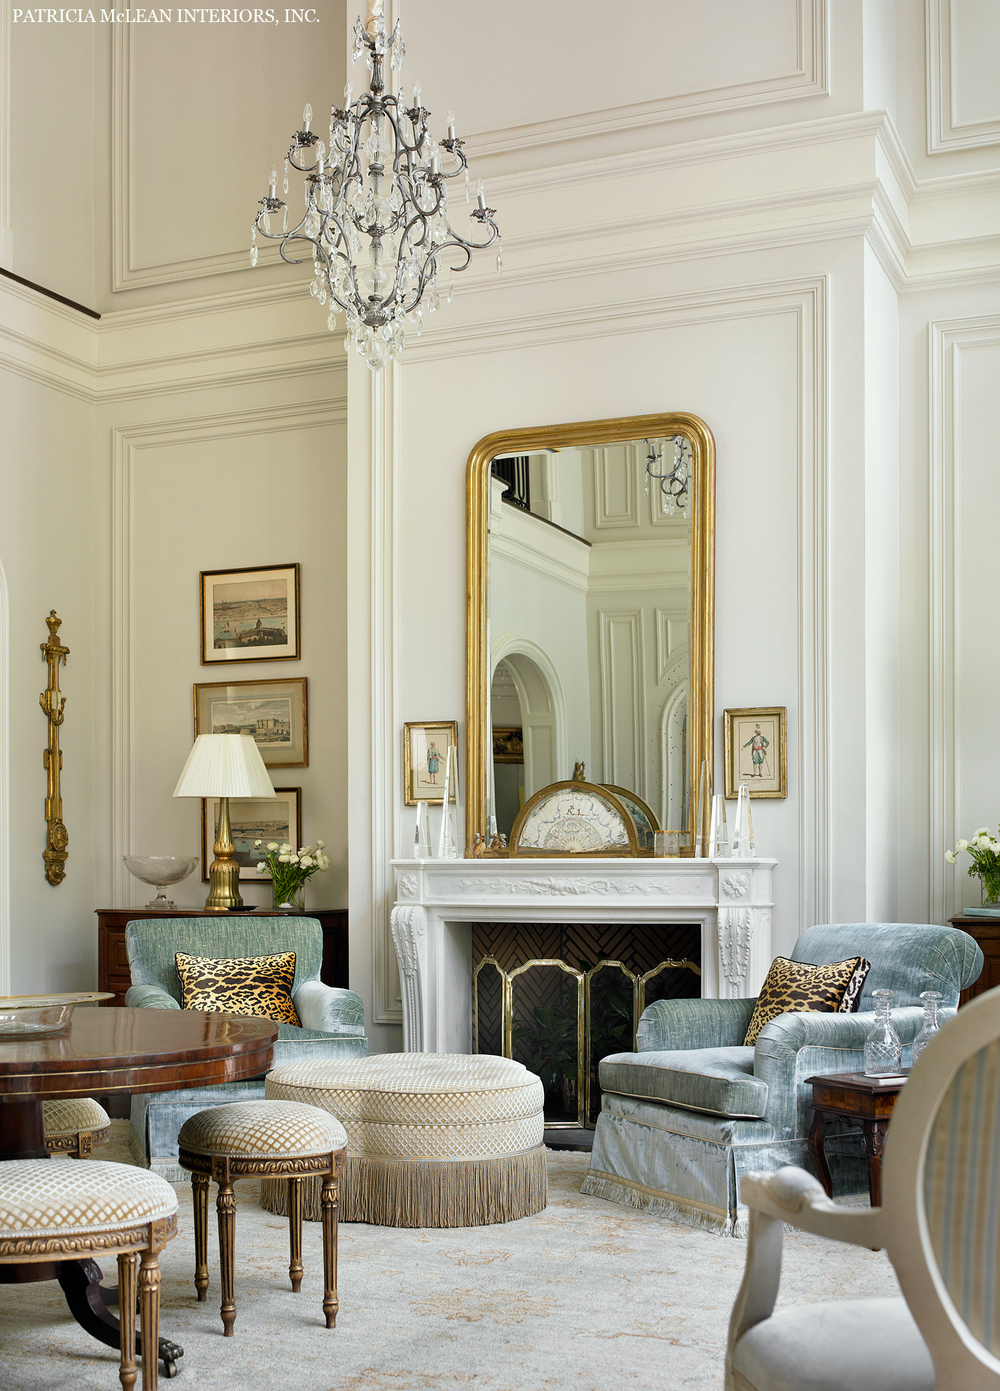 Photo Credits- Emily Followill, Robert Roth - Interior Design, Patricia McLean - architecture, William T Baker - neoclassical fireplace mantel - soaring ceiling